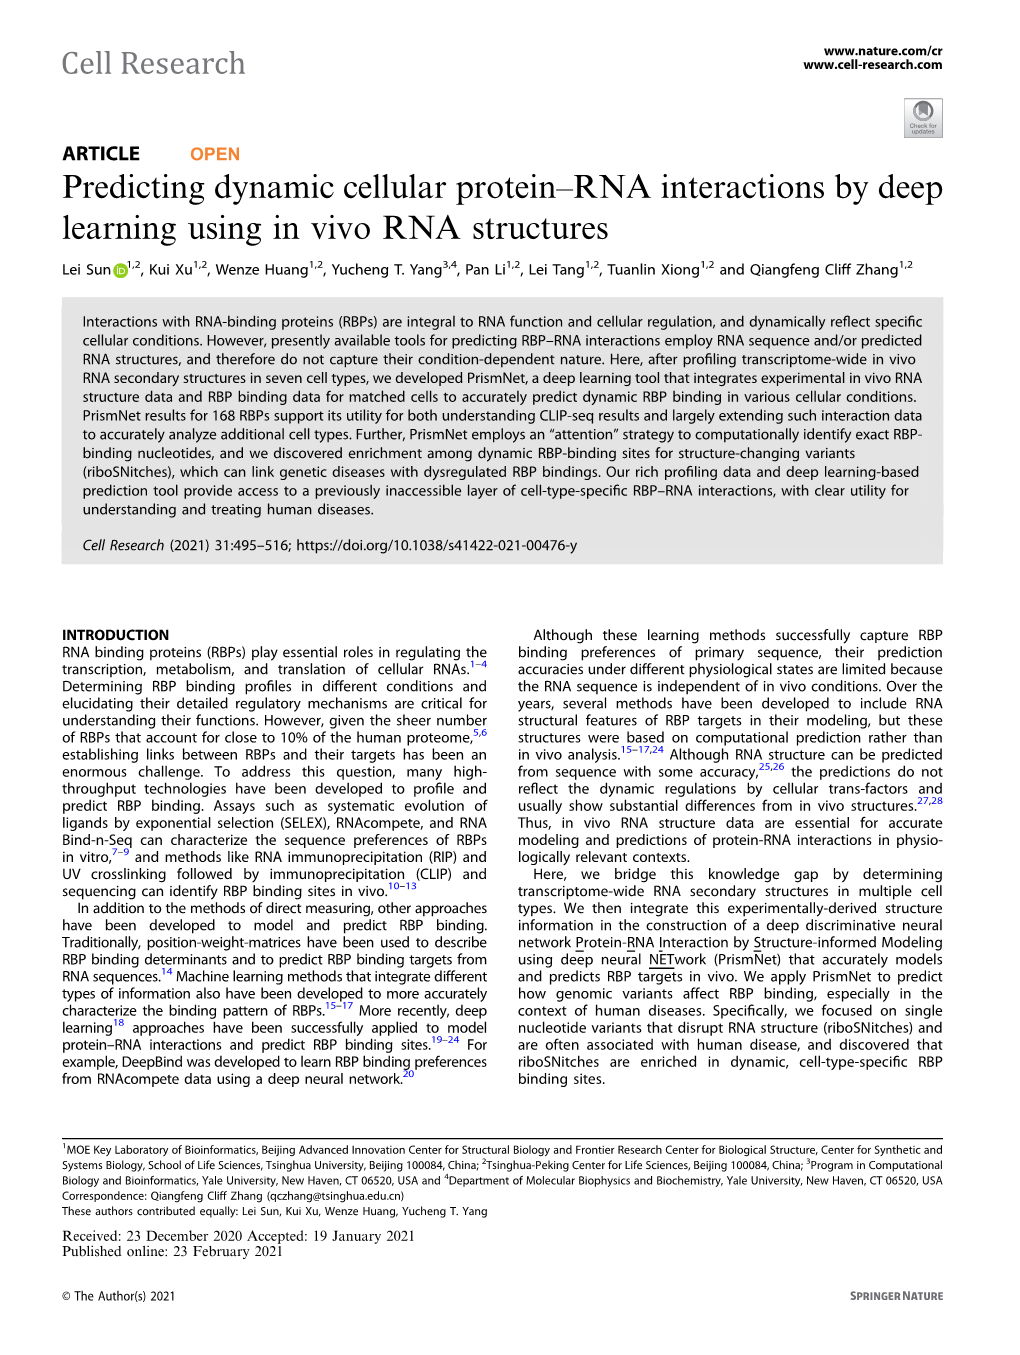 RNA Interactions by Deep Learning Using in Vivo RNA Structures